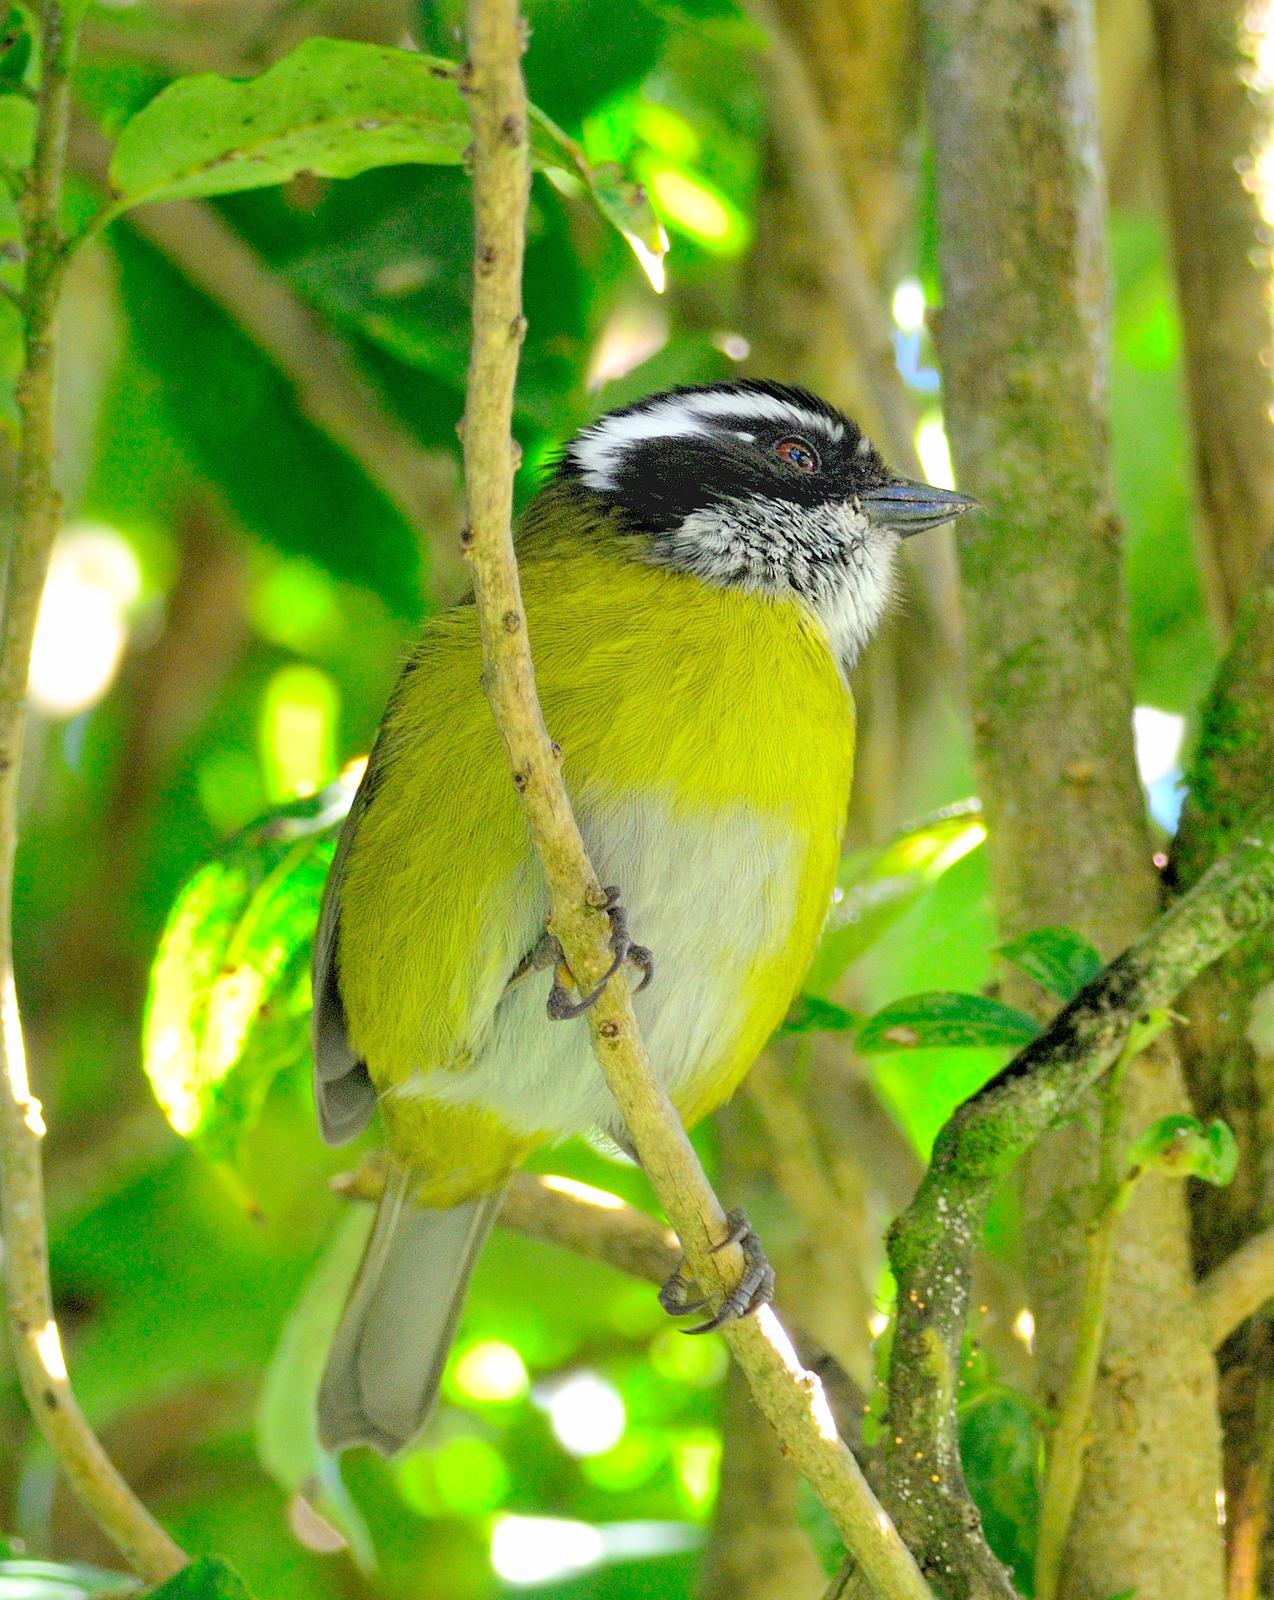 Sooty-capped Chlorospingus Photo by Laurence Pellegrini